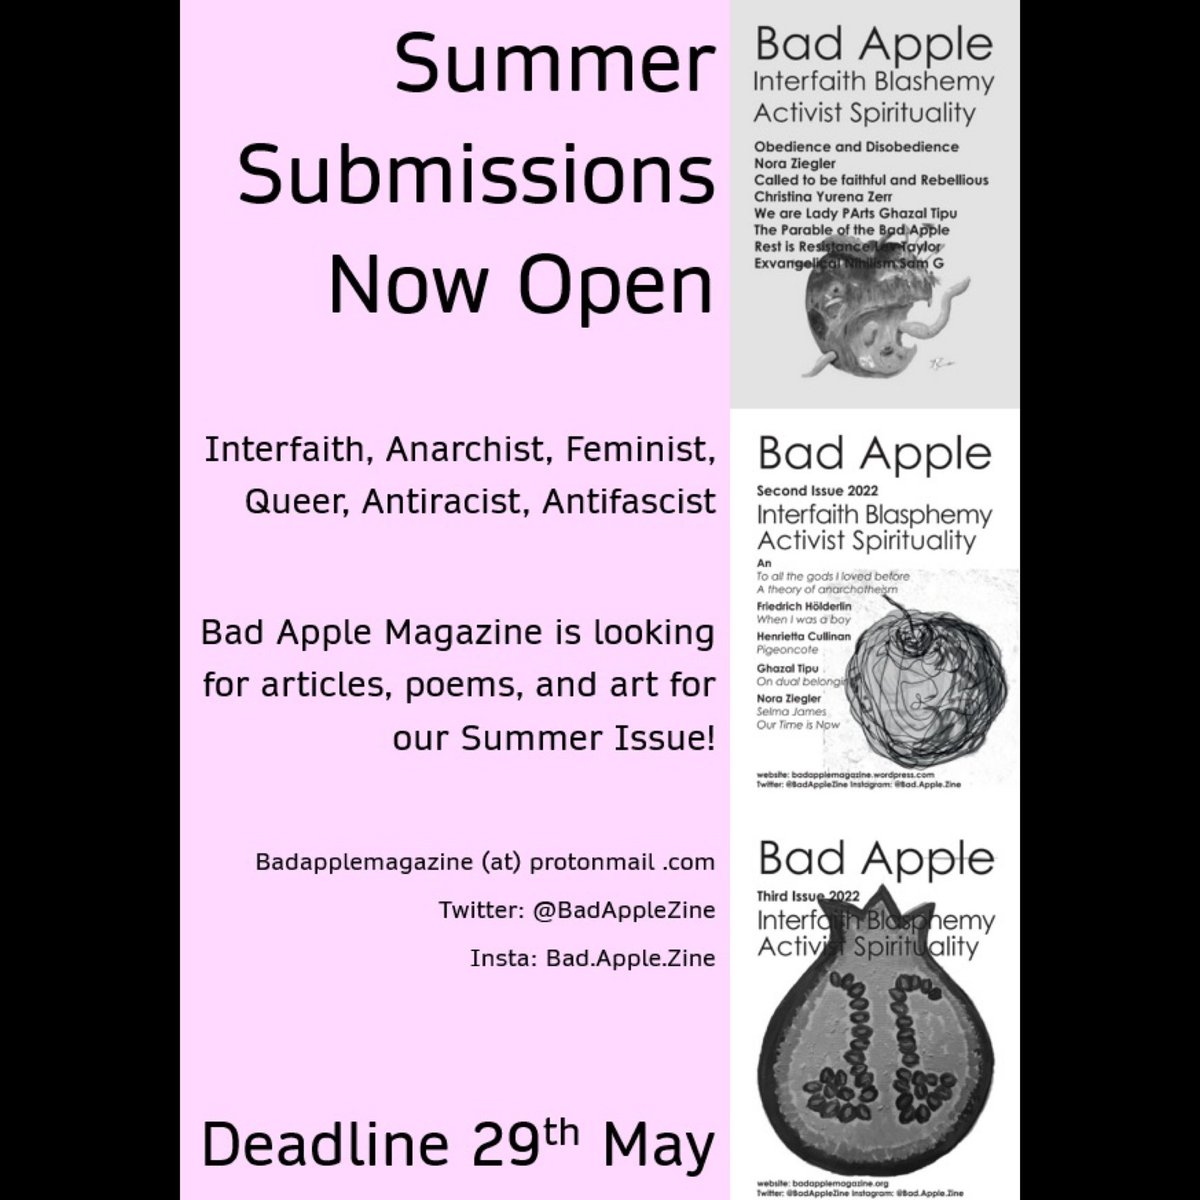 Bad Apple is on the hunt for submissions #interfaith #zine Poems, articles, drawings Deadline 29th May